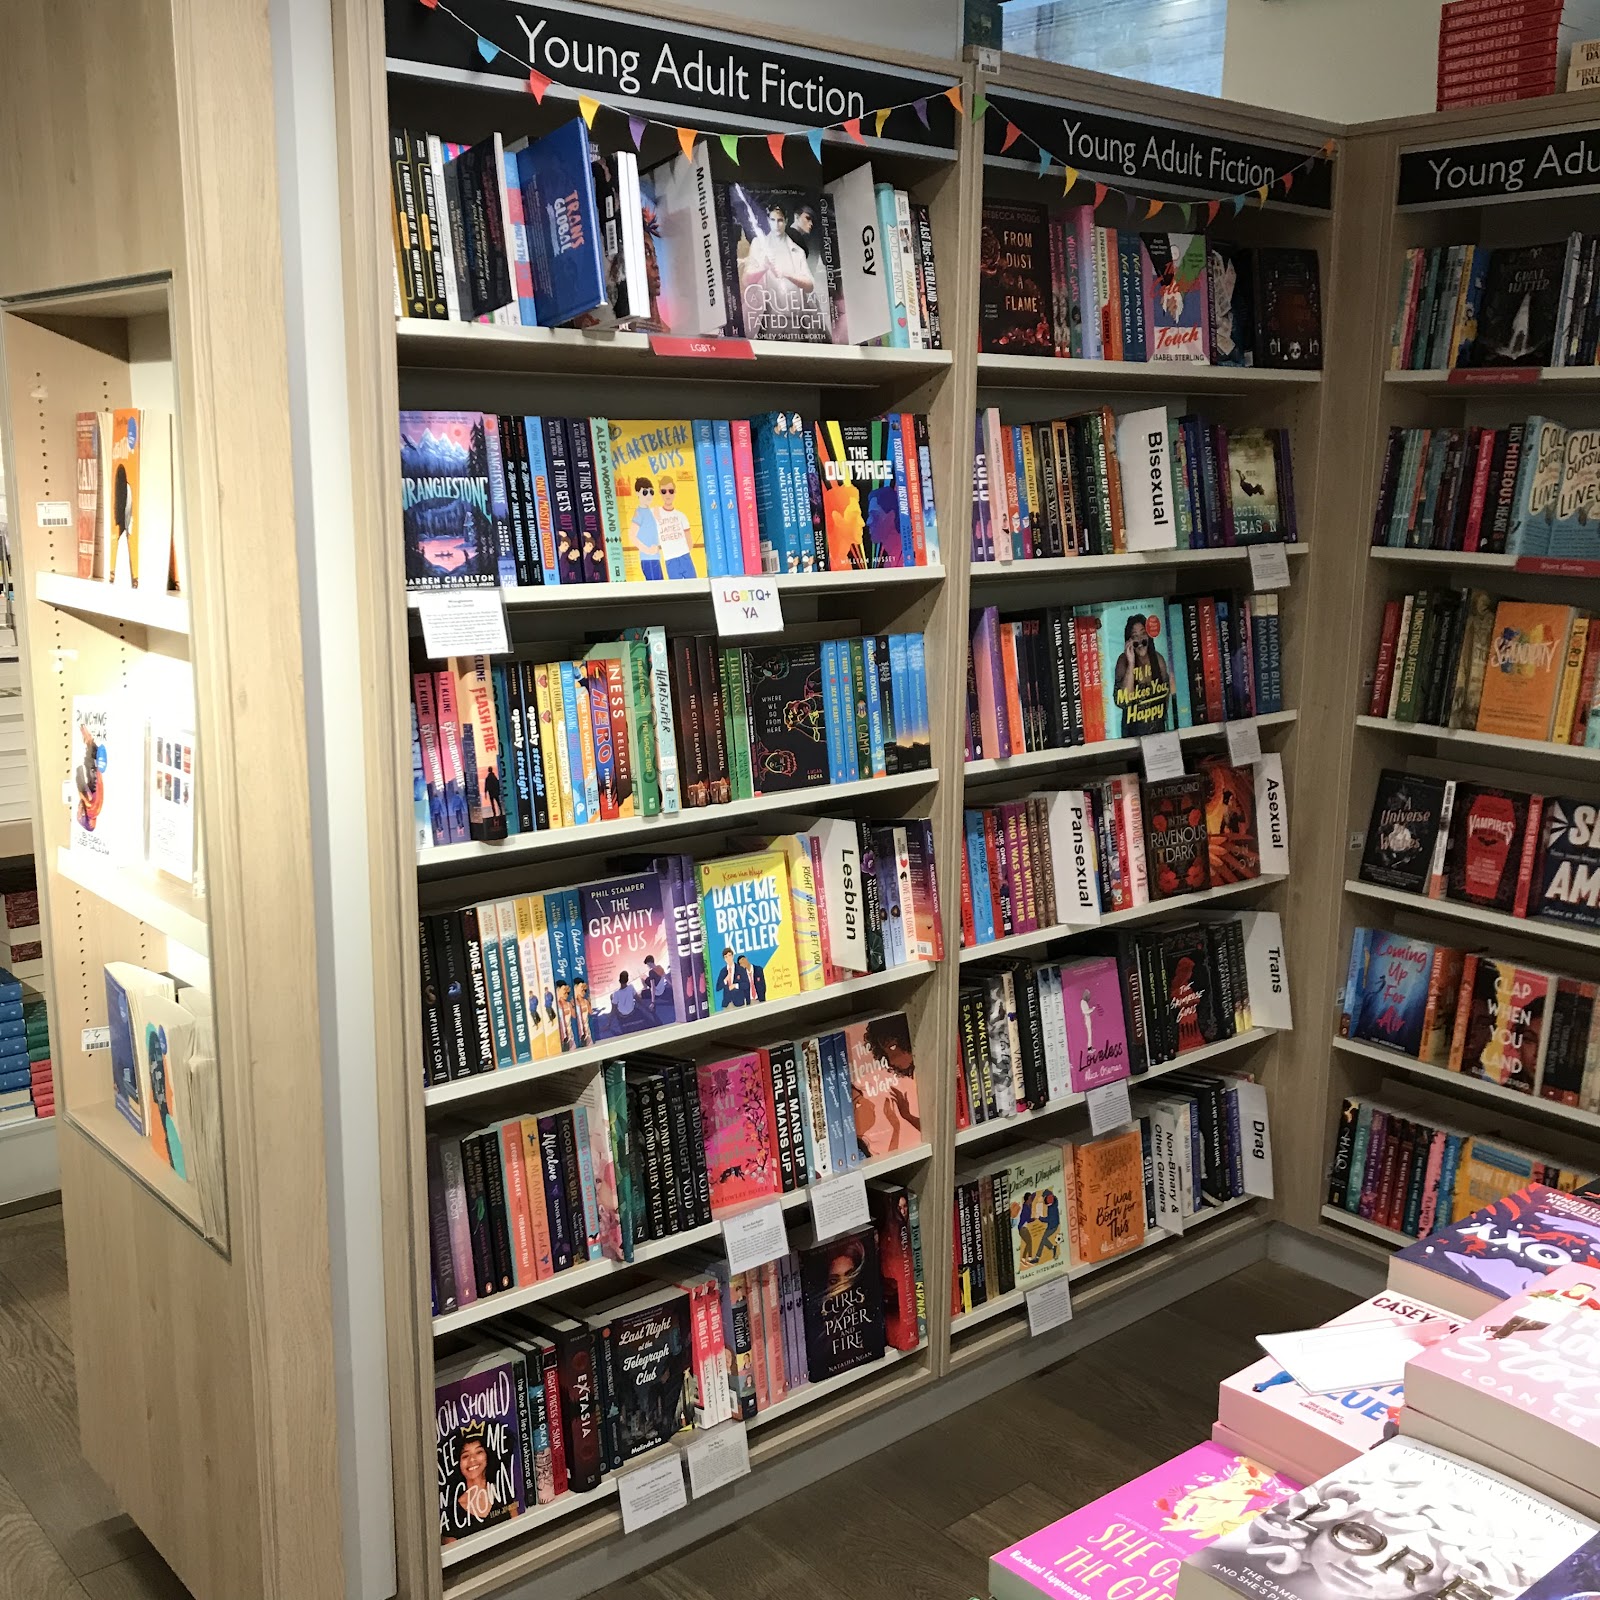 A photo of the two LGBTQ+ YA bays taken at an angle from the left, so you can read the laminated dividers, with the identities on for the subsubsections.